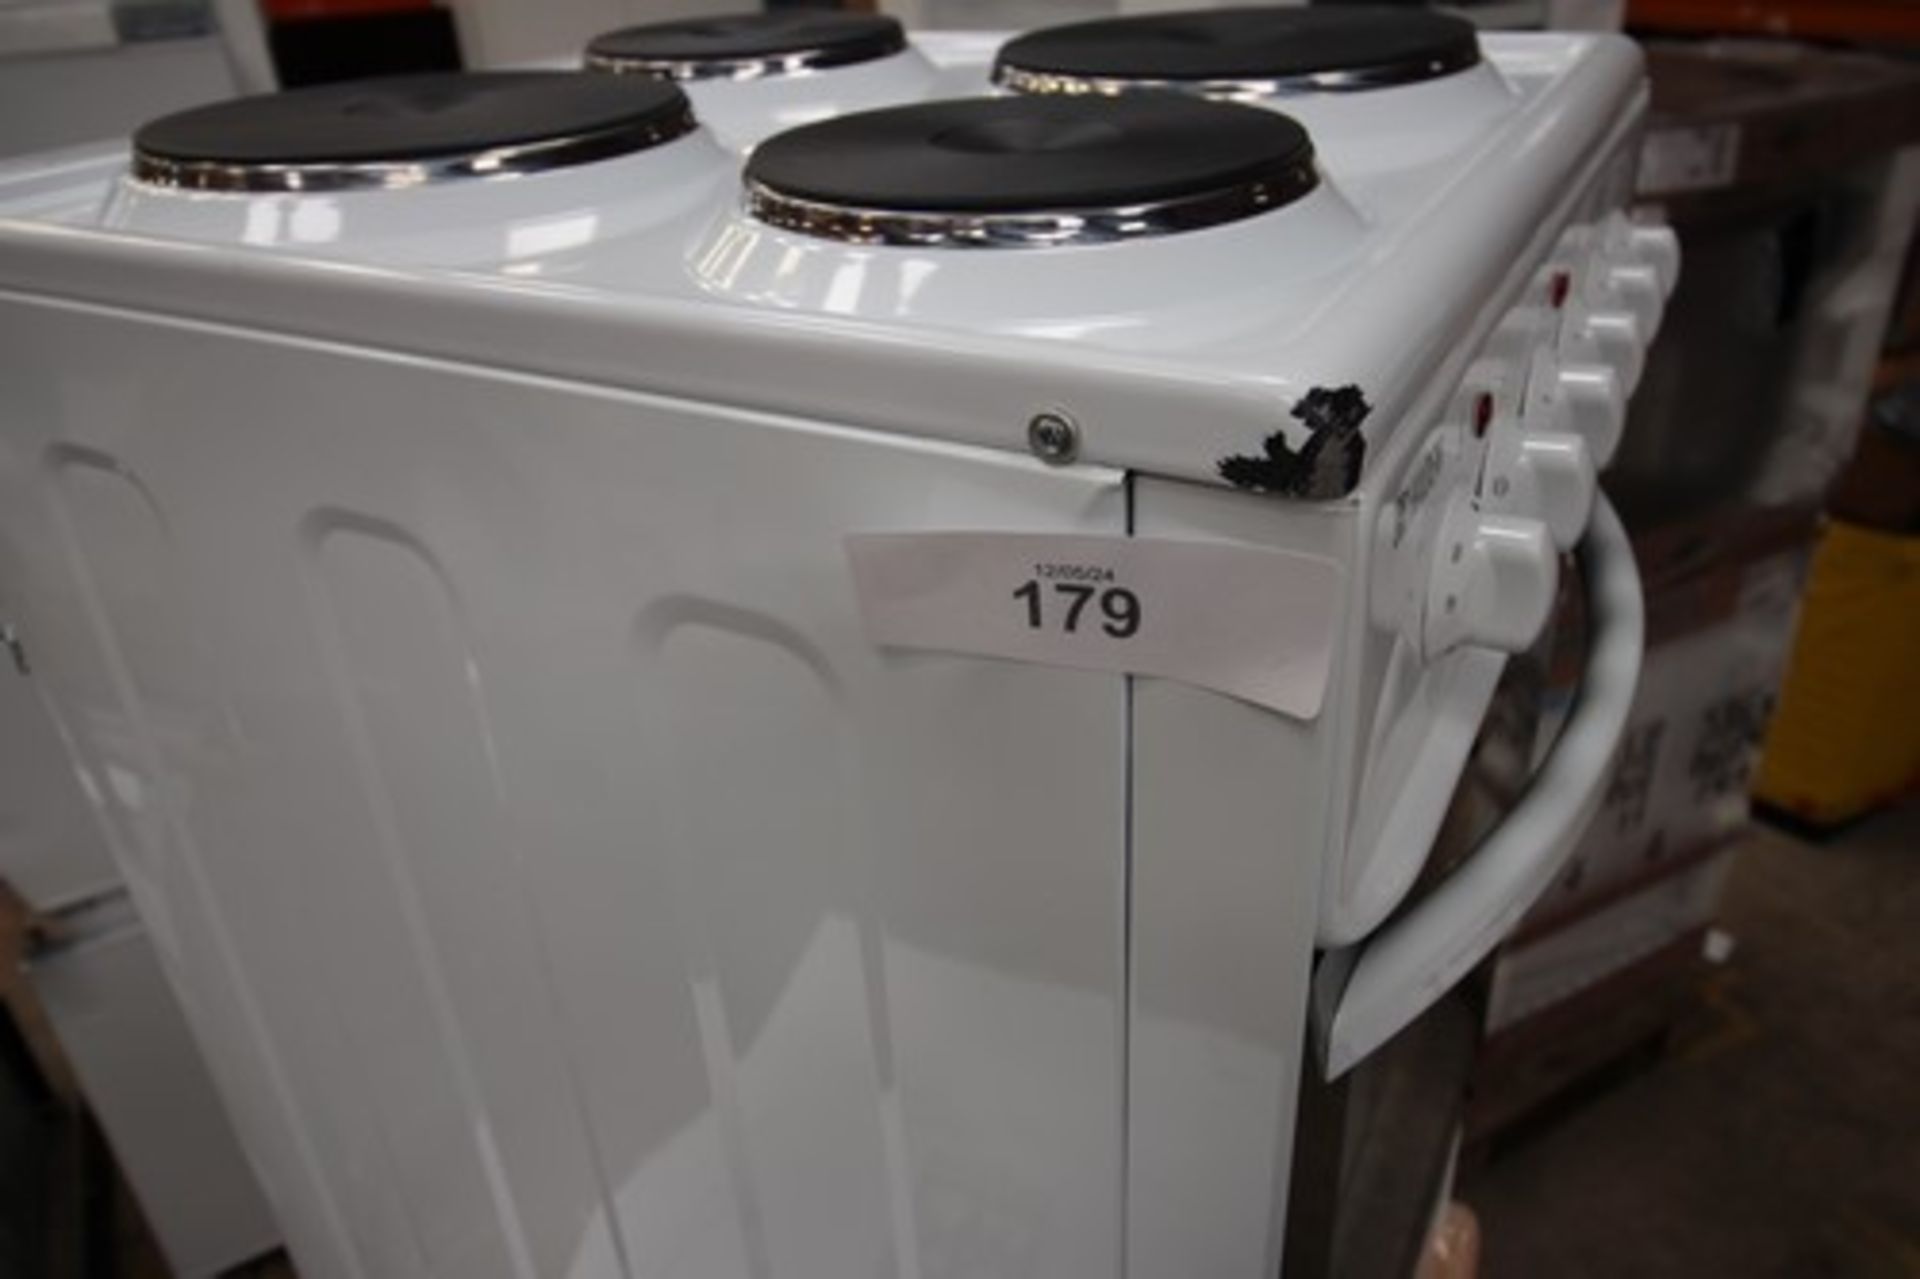 1 x Haden electric single oven and hob, Model HES50W, dented top left side panel - New (eBay 5) - Image 2 of 5